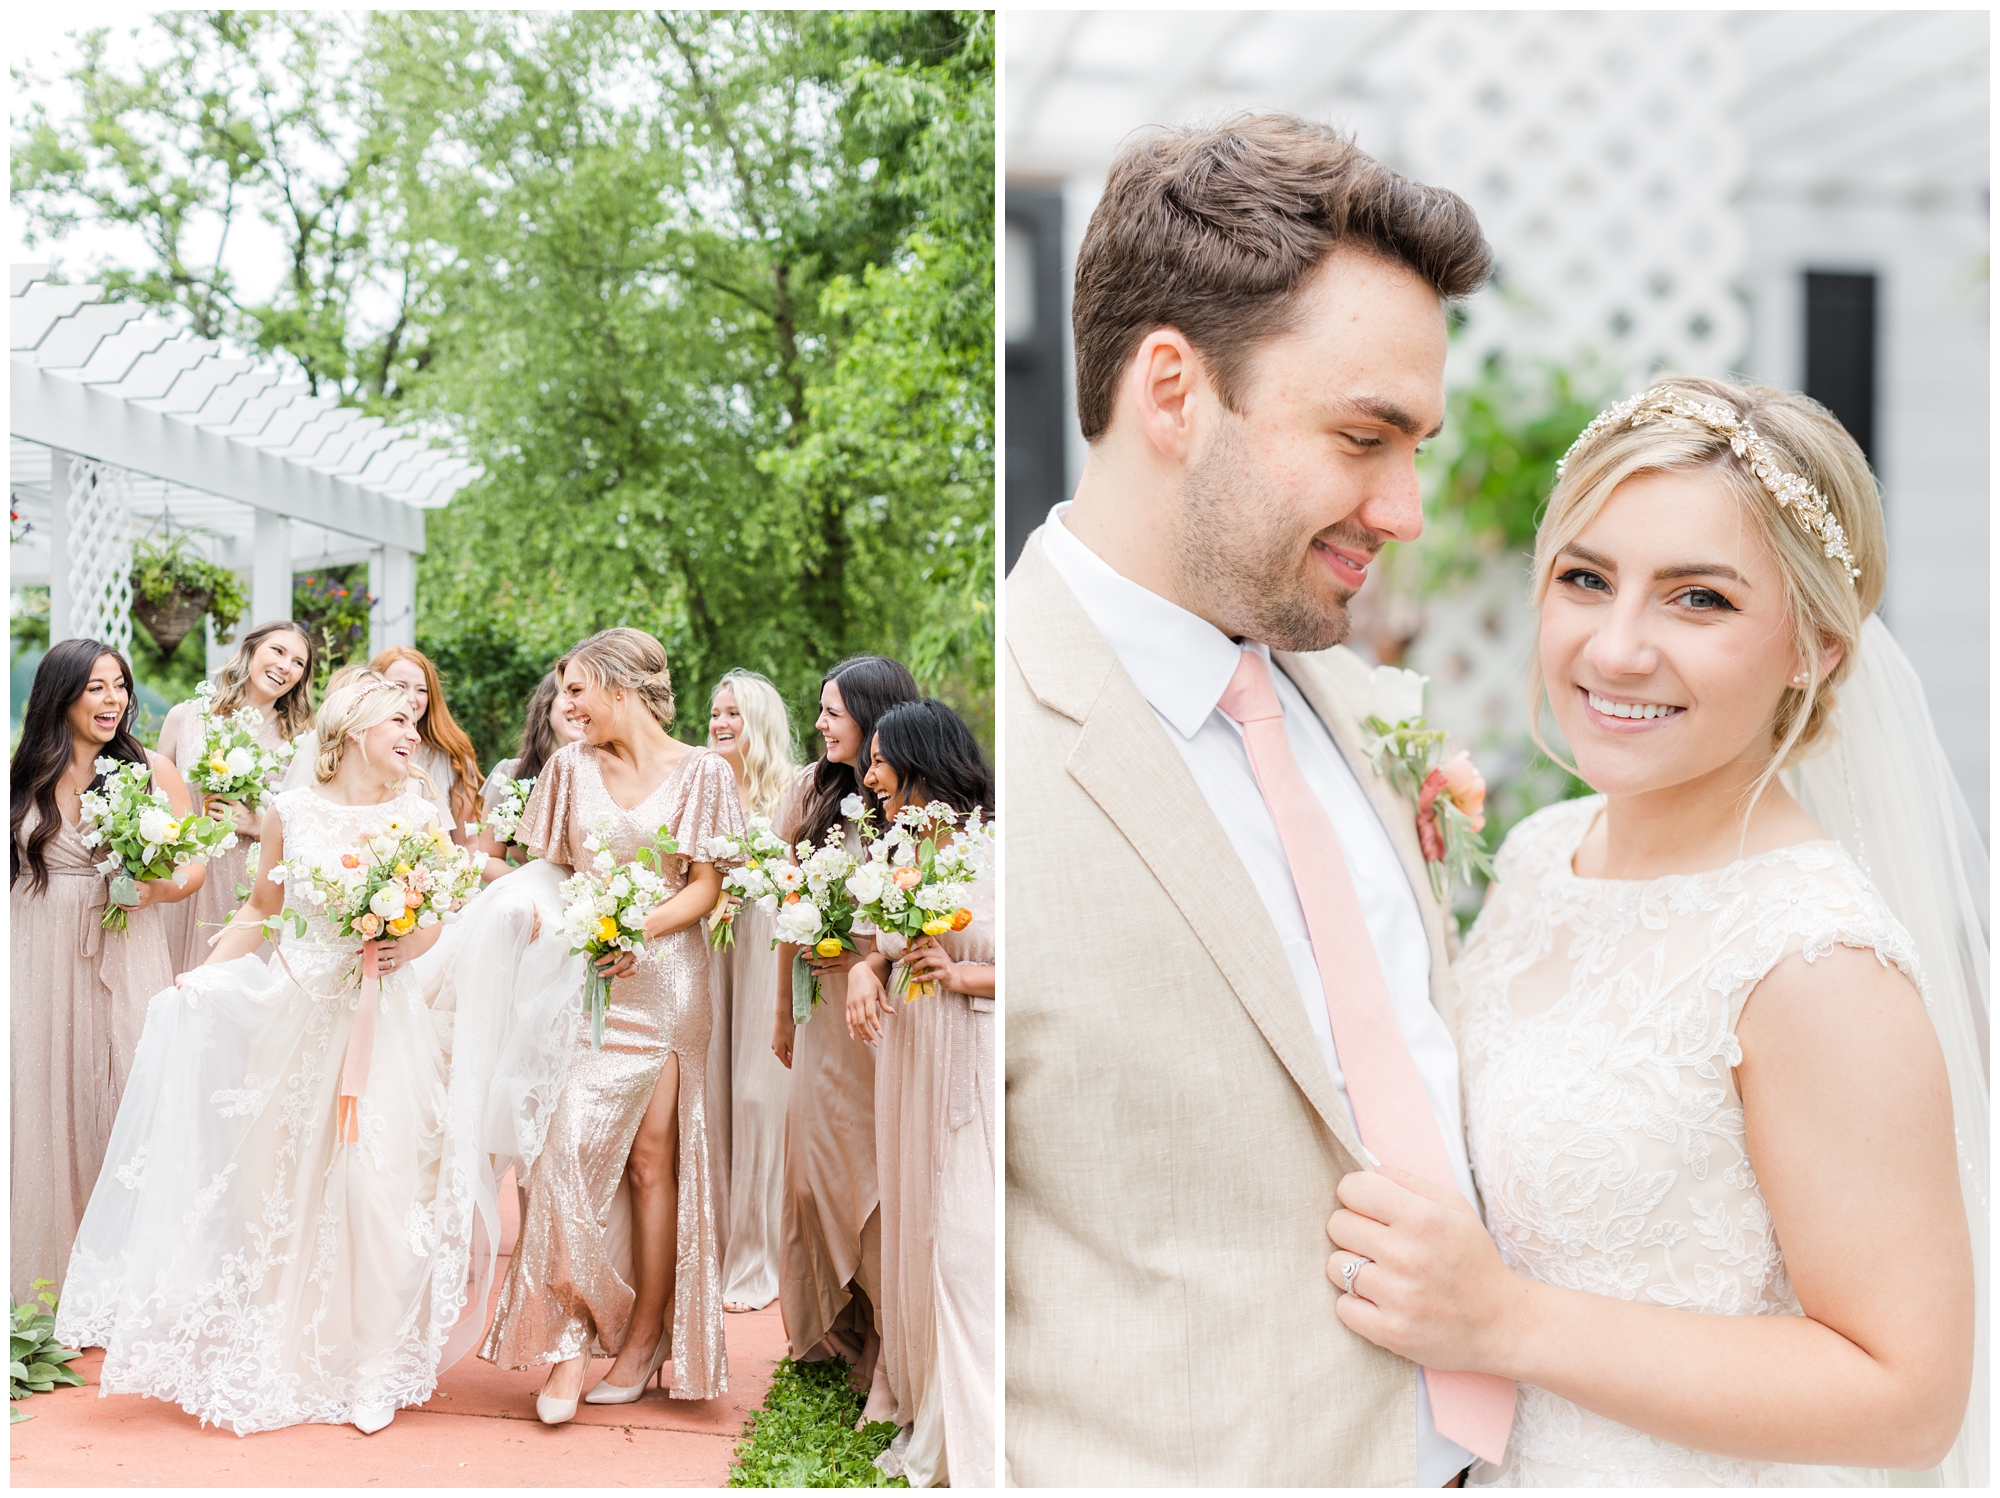 The bride poses with her bridal party. The bride and groom pose in the second picture in a smiling portrait. 